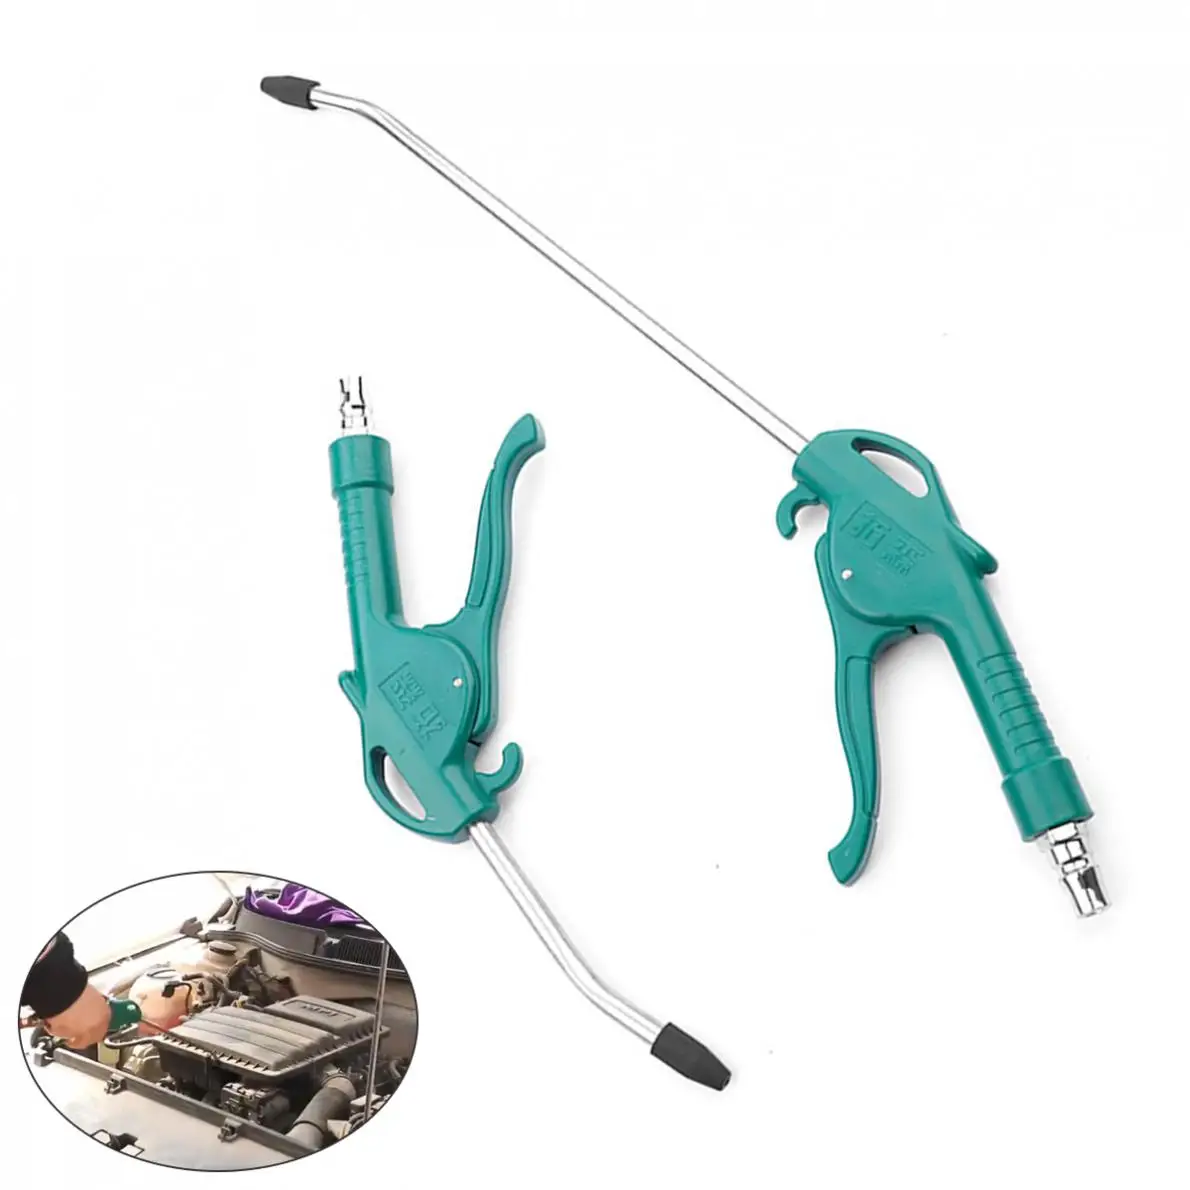 Air Blow Gun Pistol Trigger Cleaner Compressor Dust Blower Nozzle Cleaning Tool for Compressor Air Blow Gun pneumatic air blow guns triggers cleaner compressor dust blower nozzle pneumatic dropship